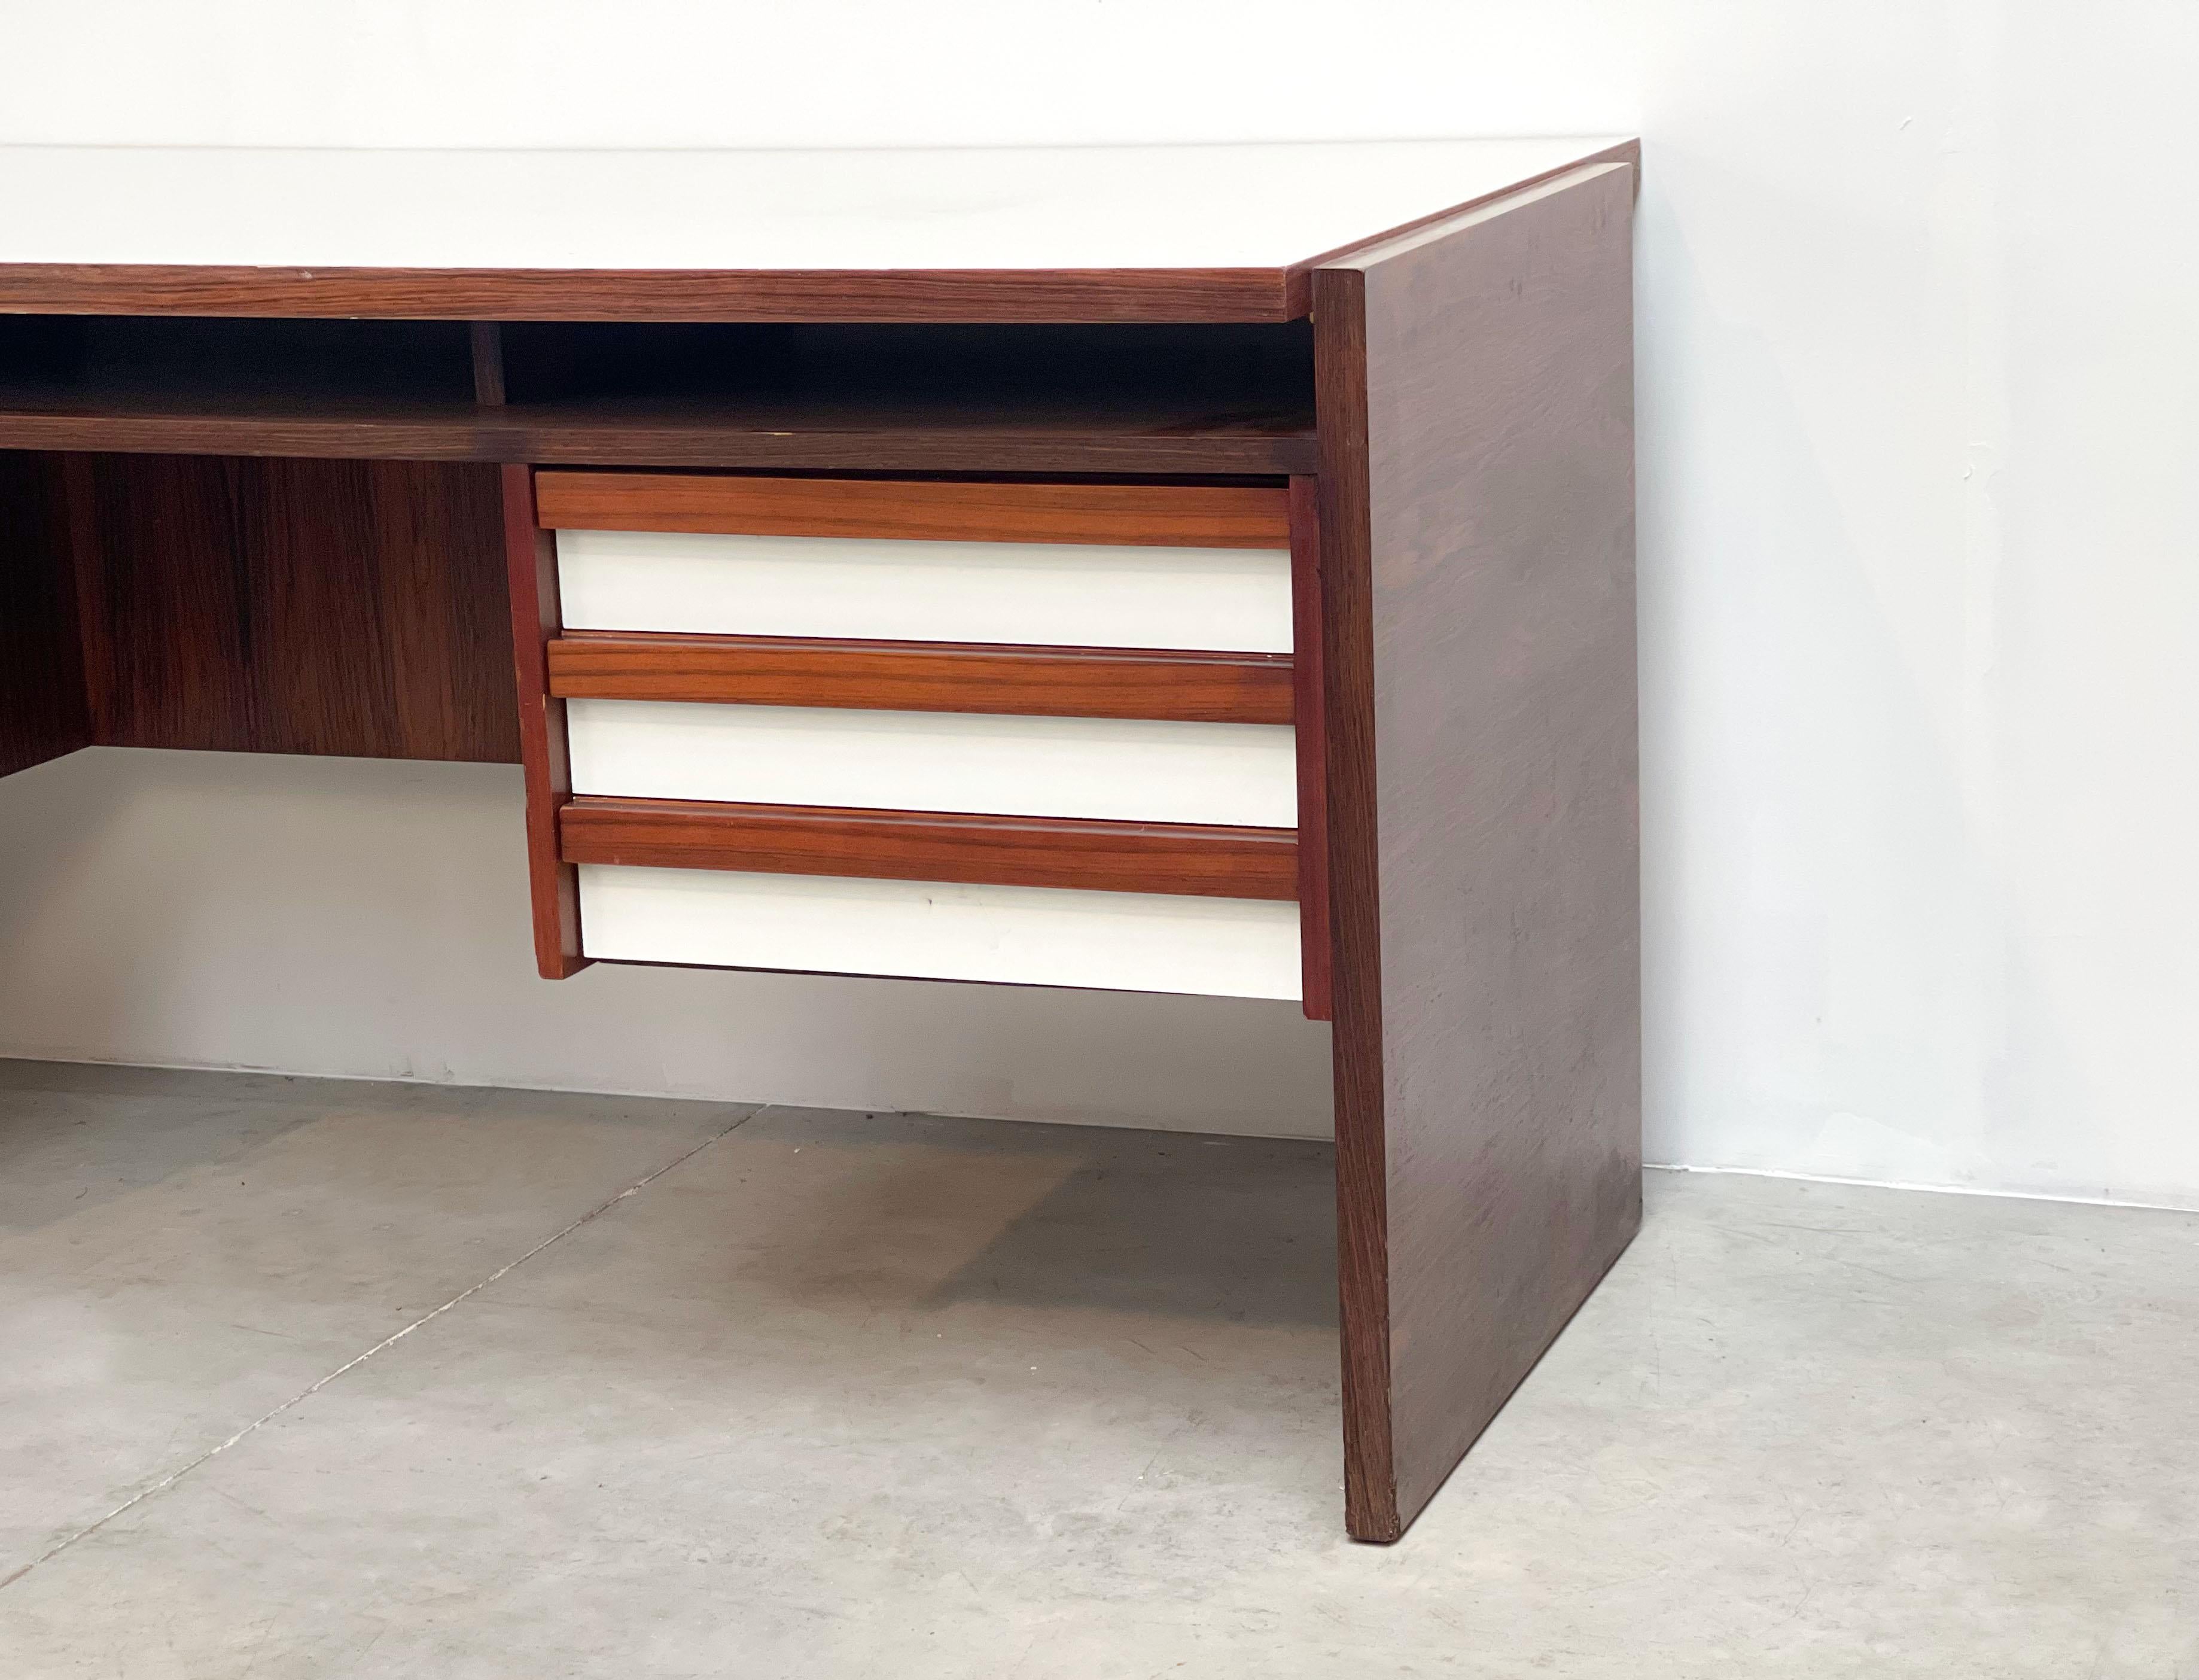 Late 20th Century Midcentury Belgian desk by V-form